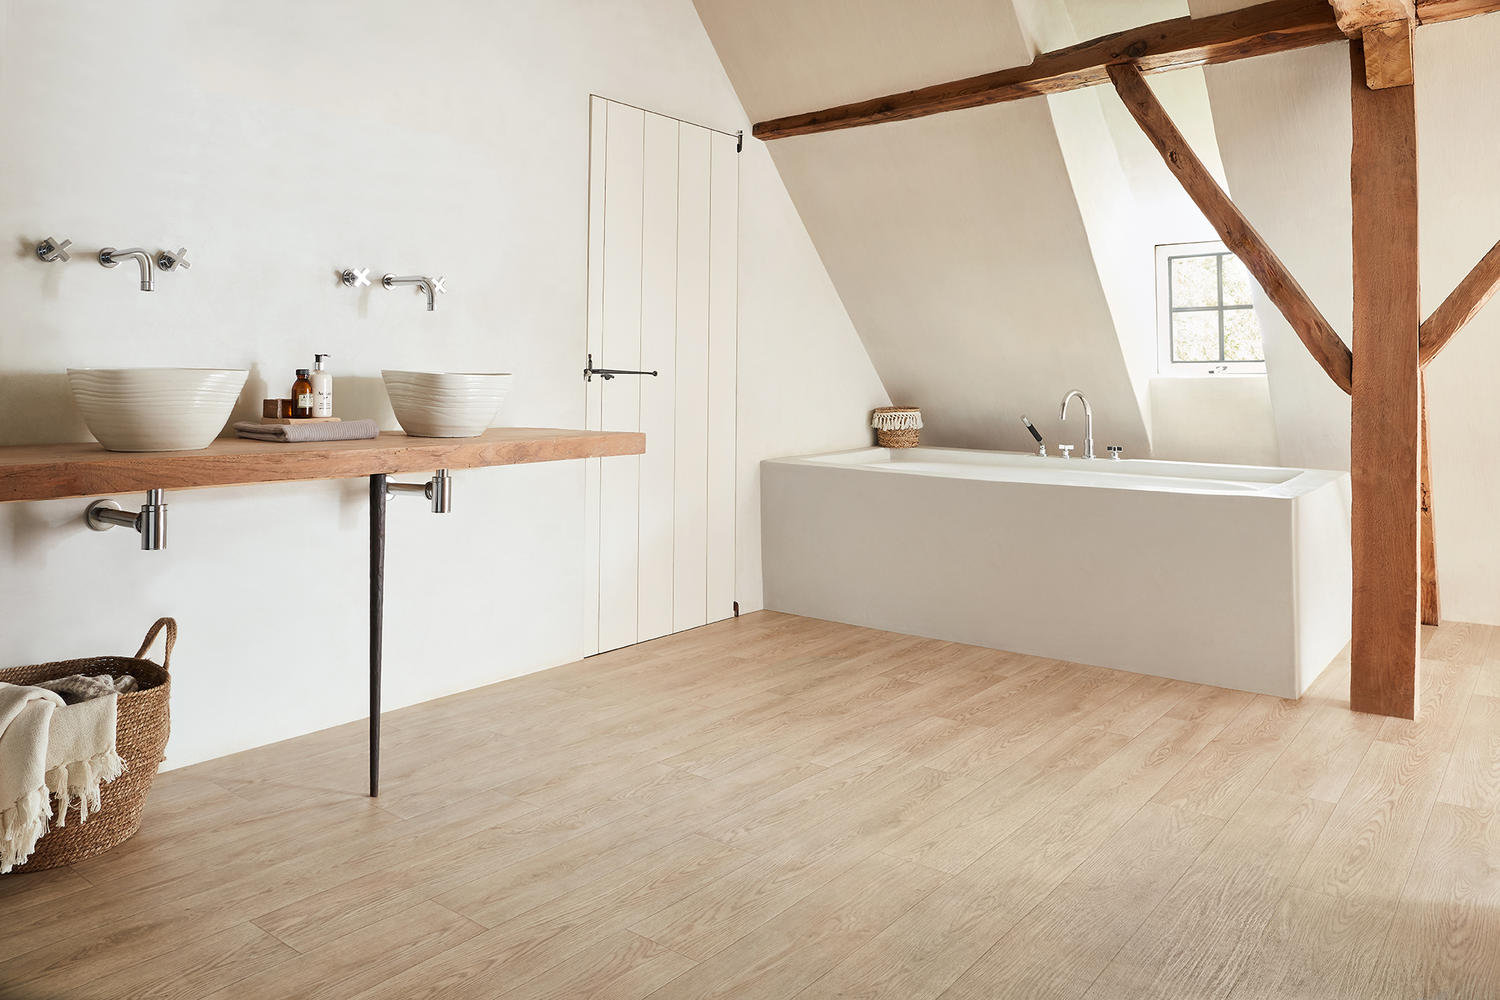 What Is The Best Flooring For Bathrooms, Laminate Flooring In Bathrooms Good Or Bad